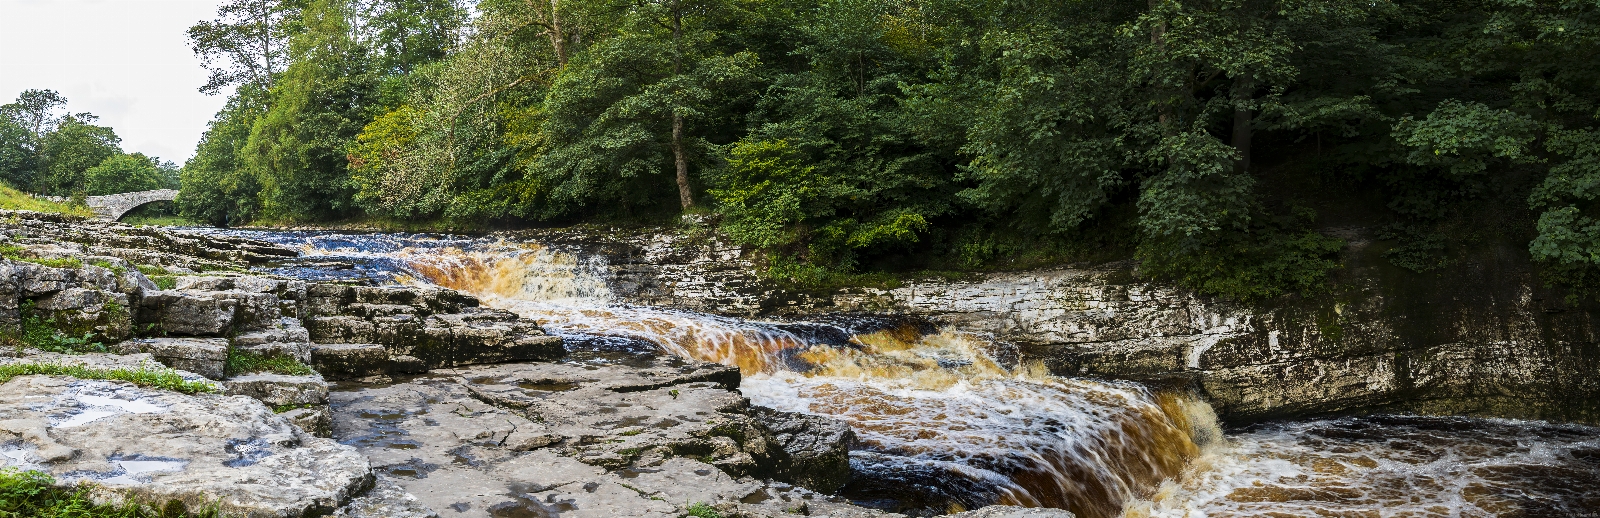 Image of Stainforth Force, Ribblesdale by Steven Godwin